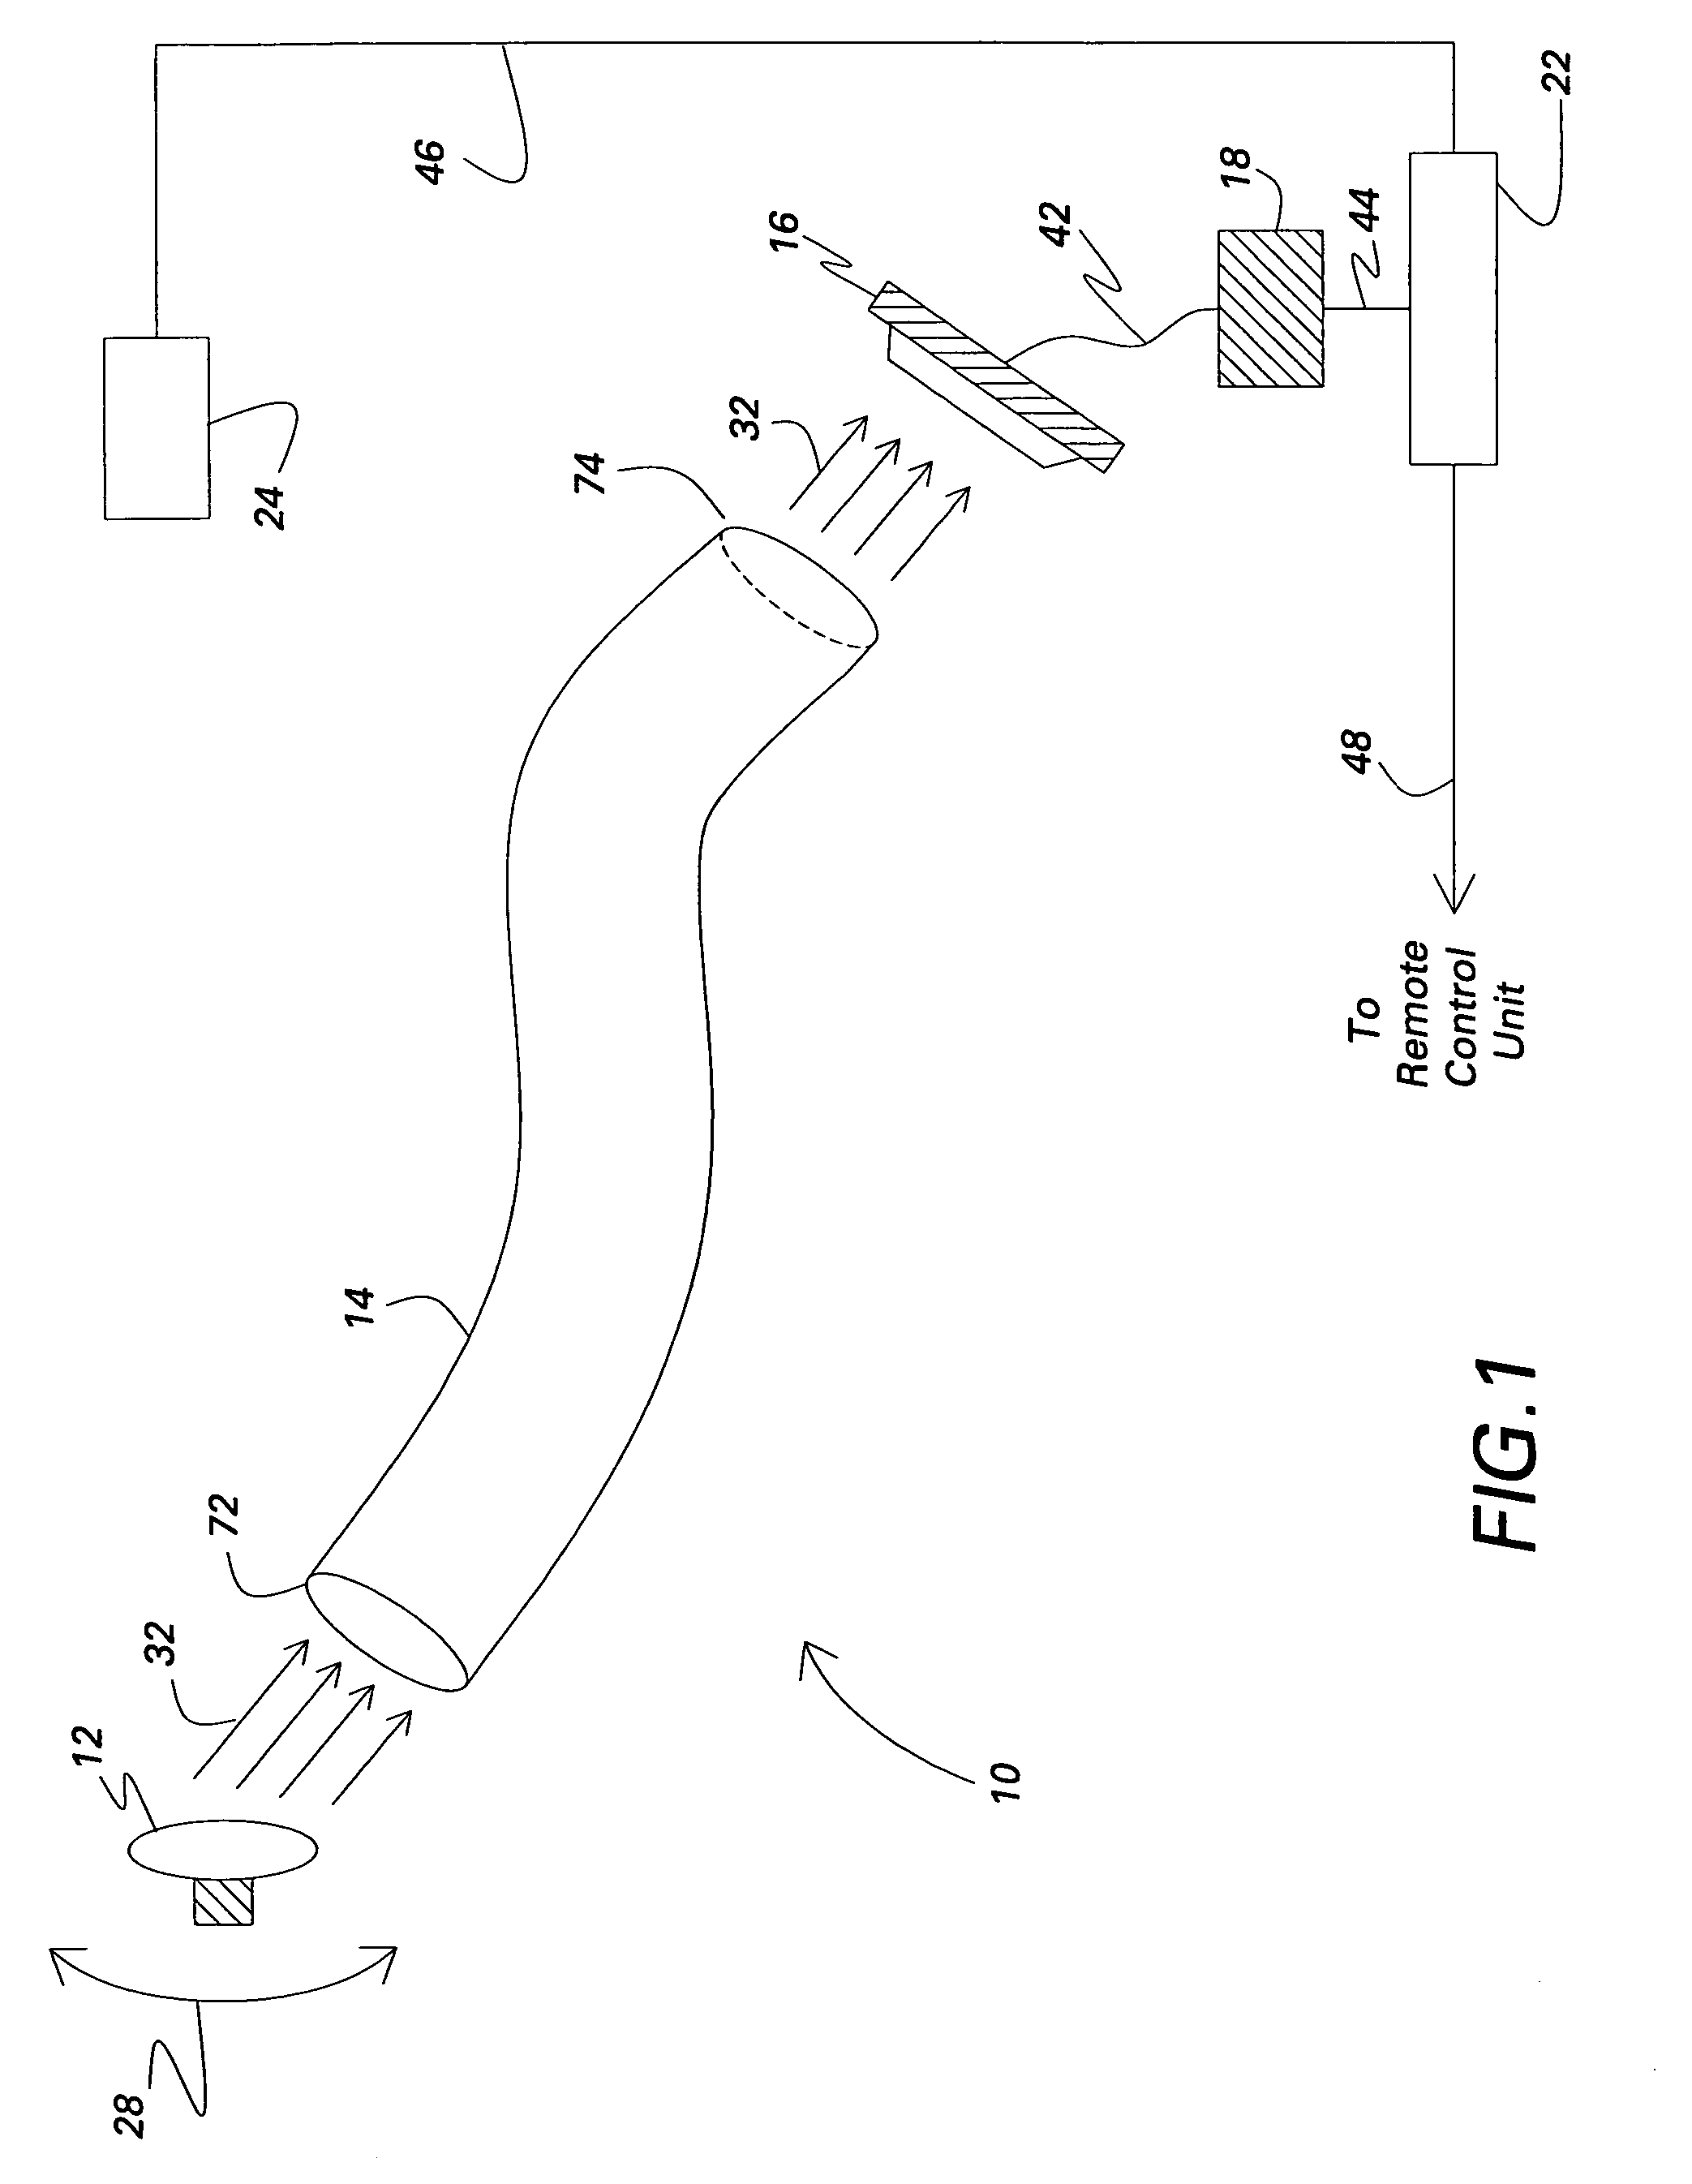 System and method for monitoring status of a visual signal device